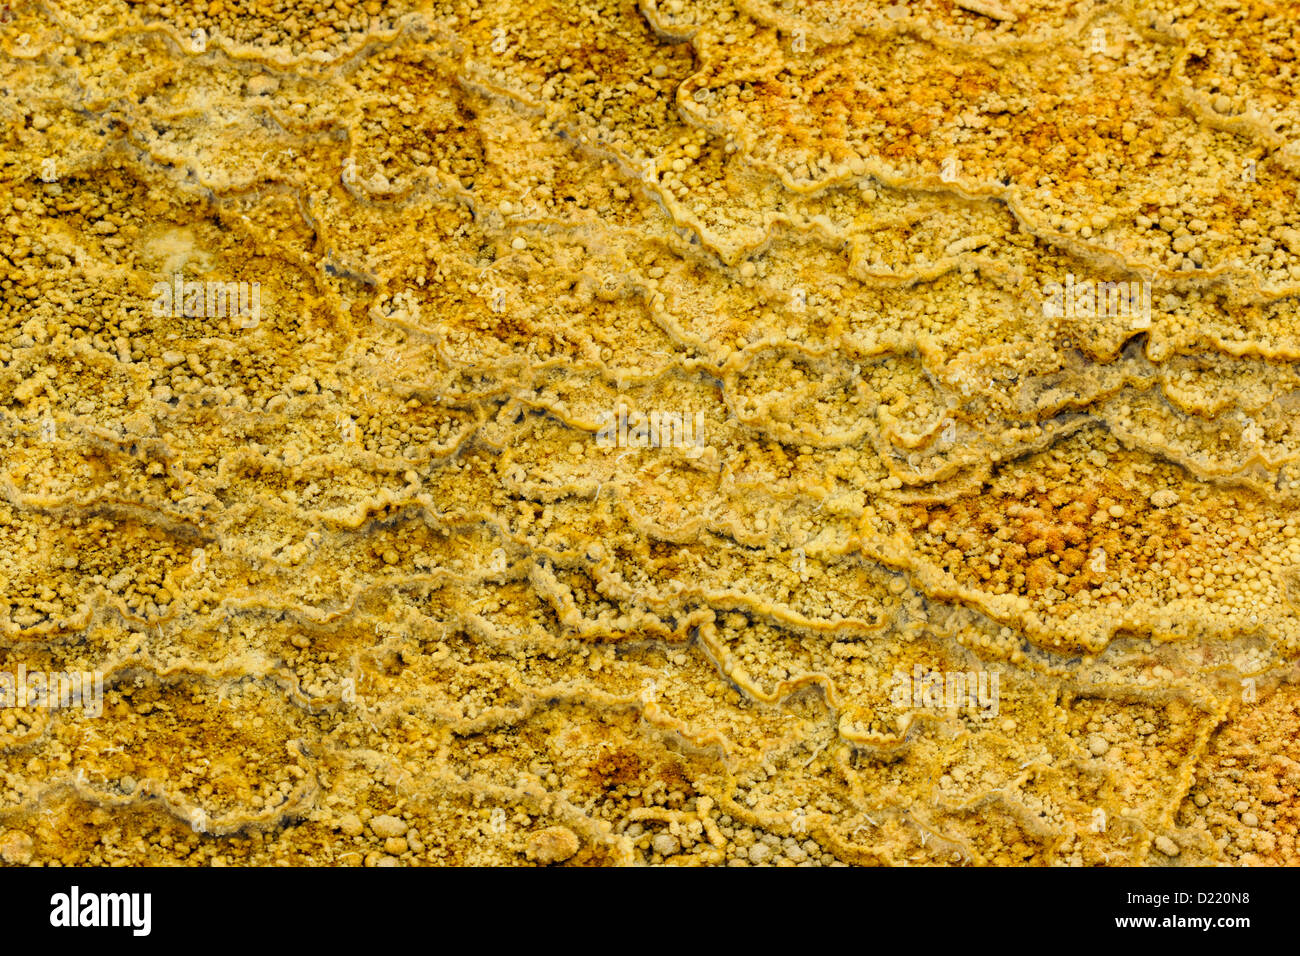 Details of ridges and terraces created by cyanobacteria in the outflow from Palette Spring, Yellowstone National Park, Wyoming, USA Stock Photo